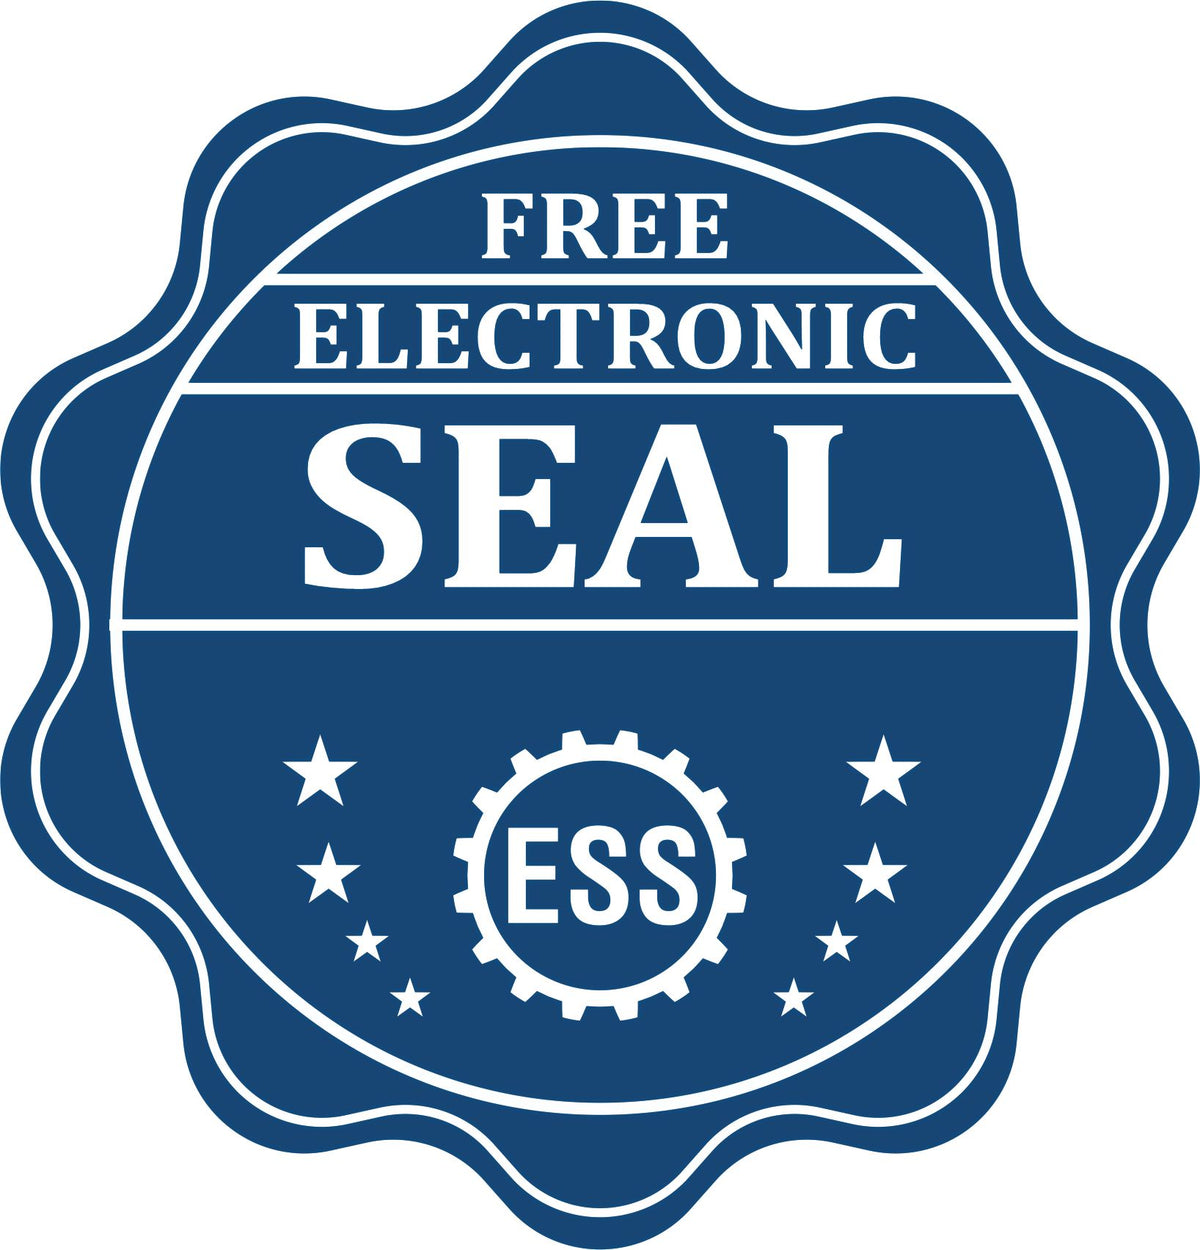 A badge showing a free electronic seal for the Soft North Dakota Professional Engineer Seal with stars and the ESS gear on the emblem.